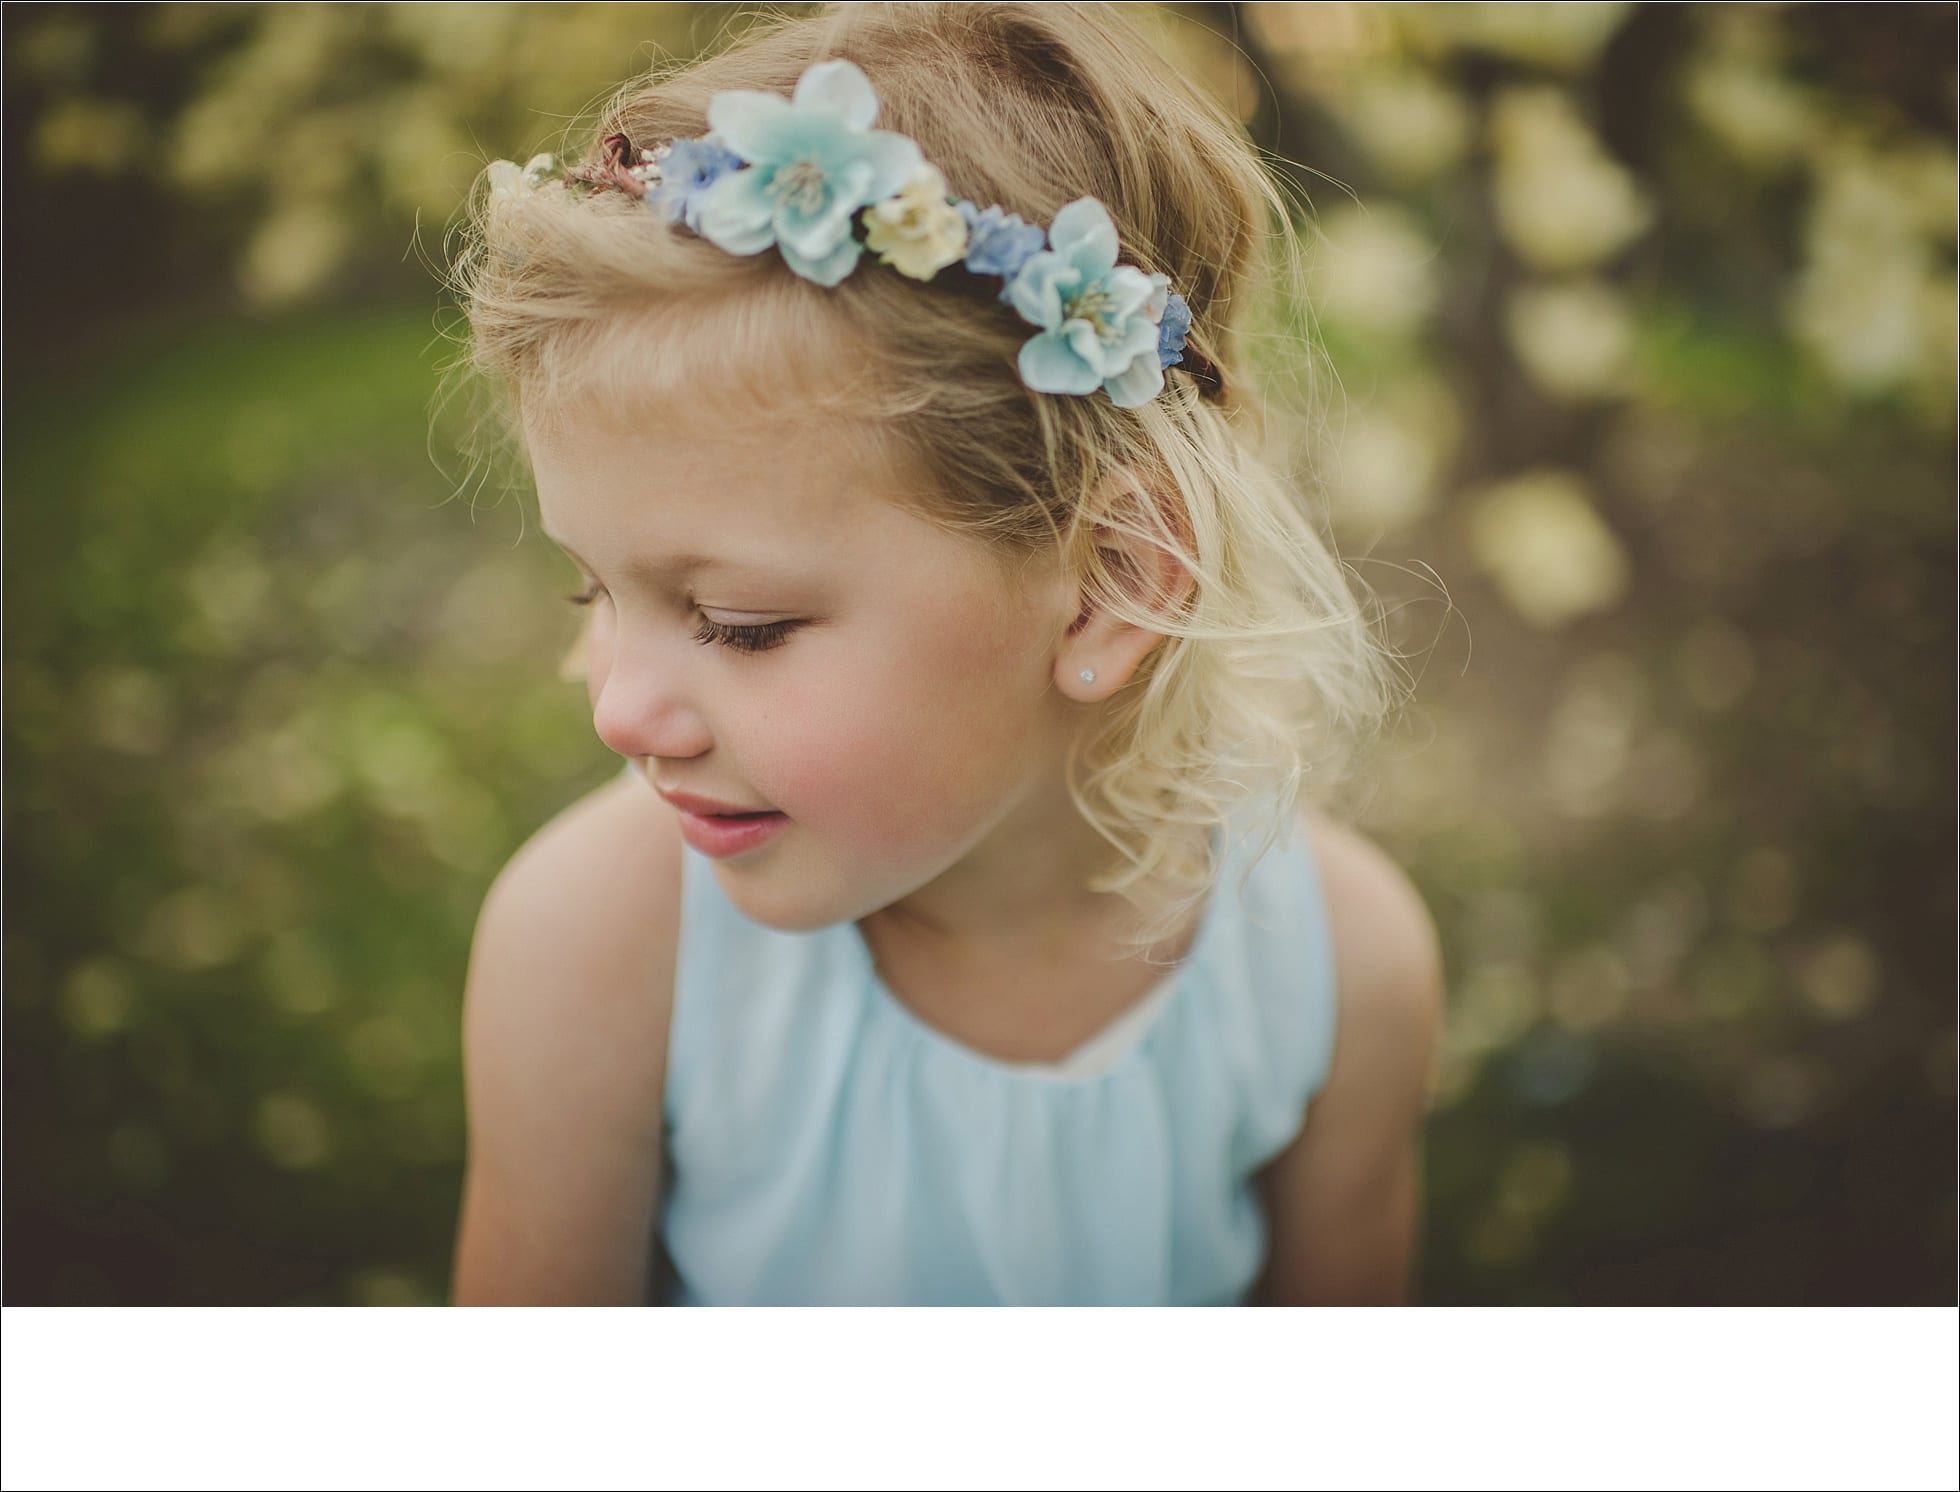 hair flowers, outdoor sessions, cute kids, happy parents, Madison mini's